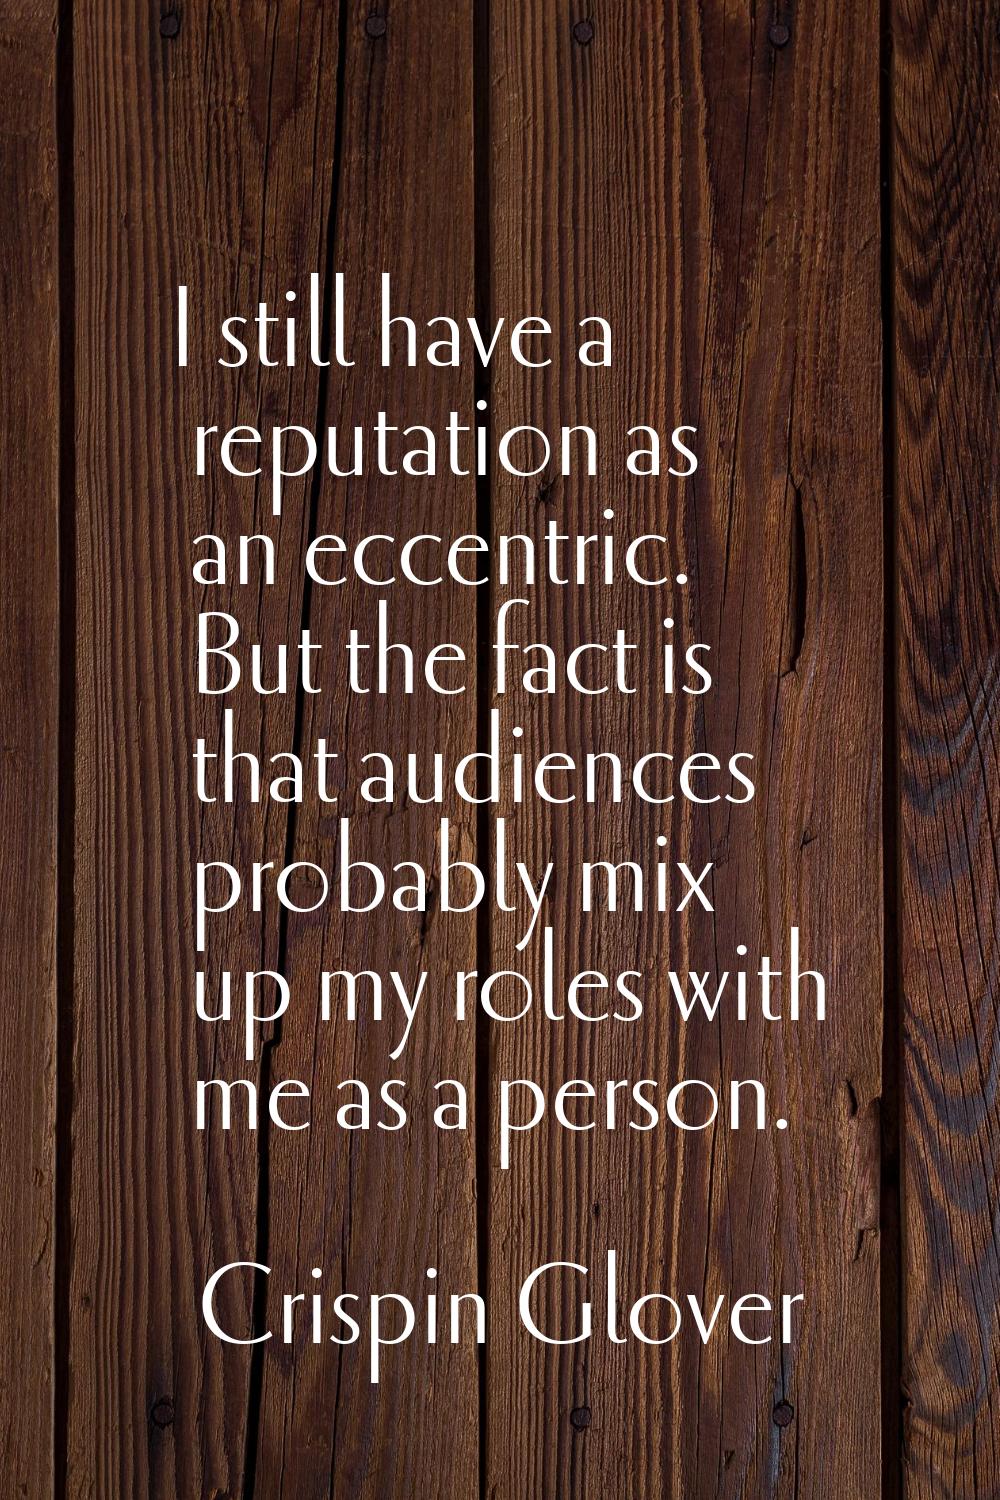 I still have a reputation as an eccentric. But the fact is that audiences probably mix up my roles 